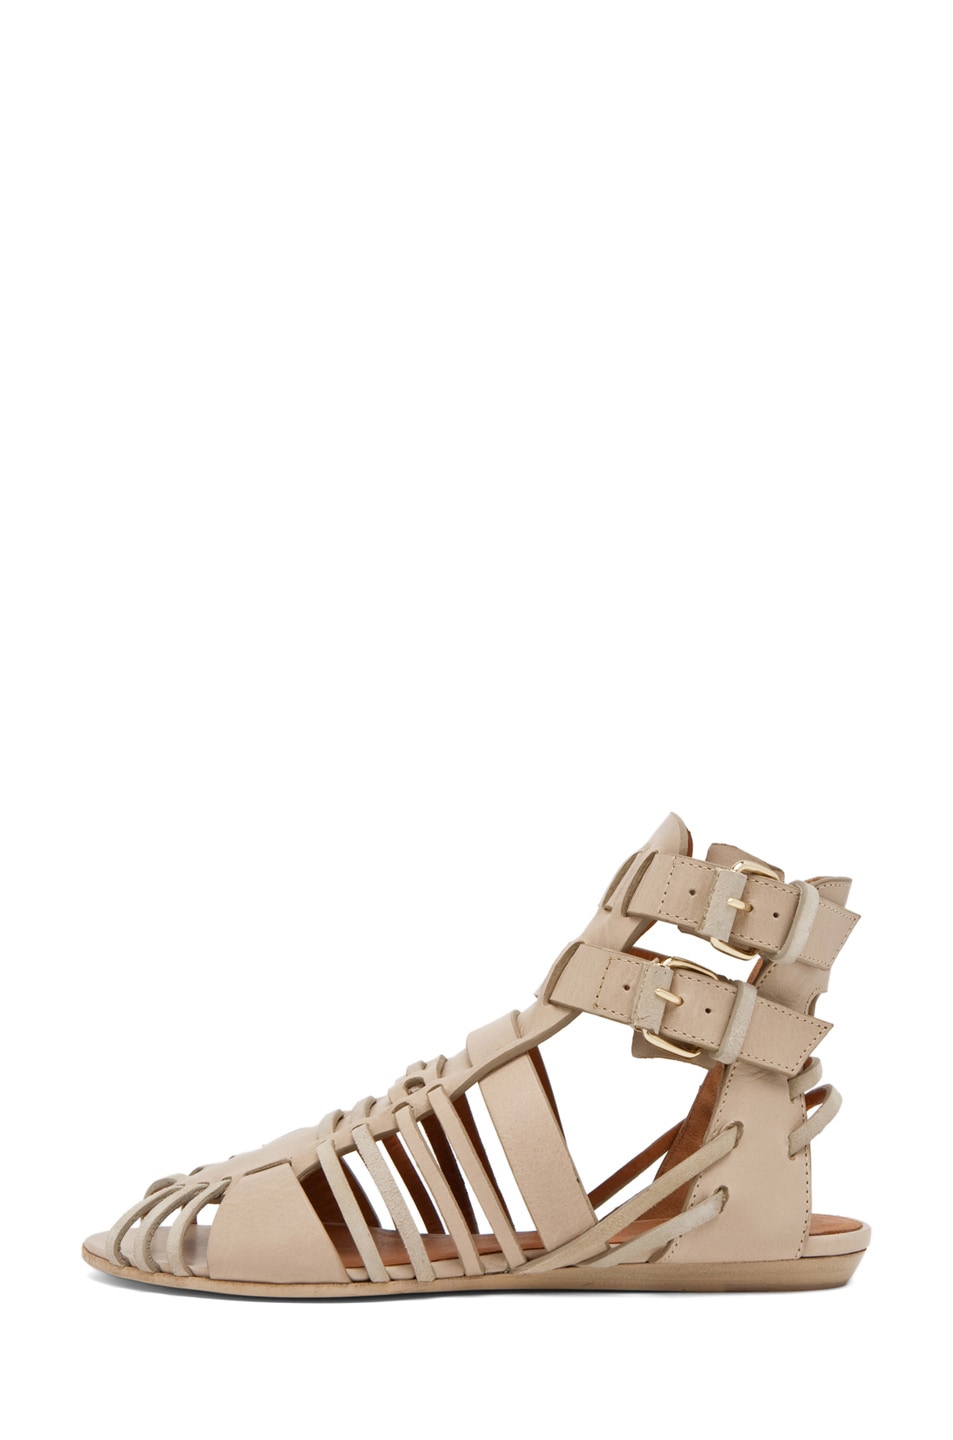 Image 1 of Givenchy Gladiator Sandal in Sand